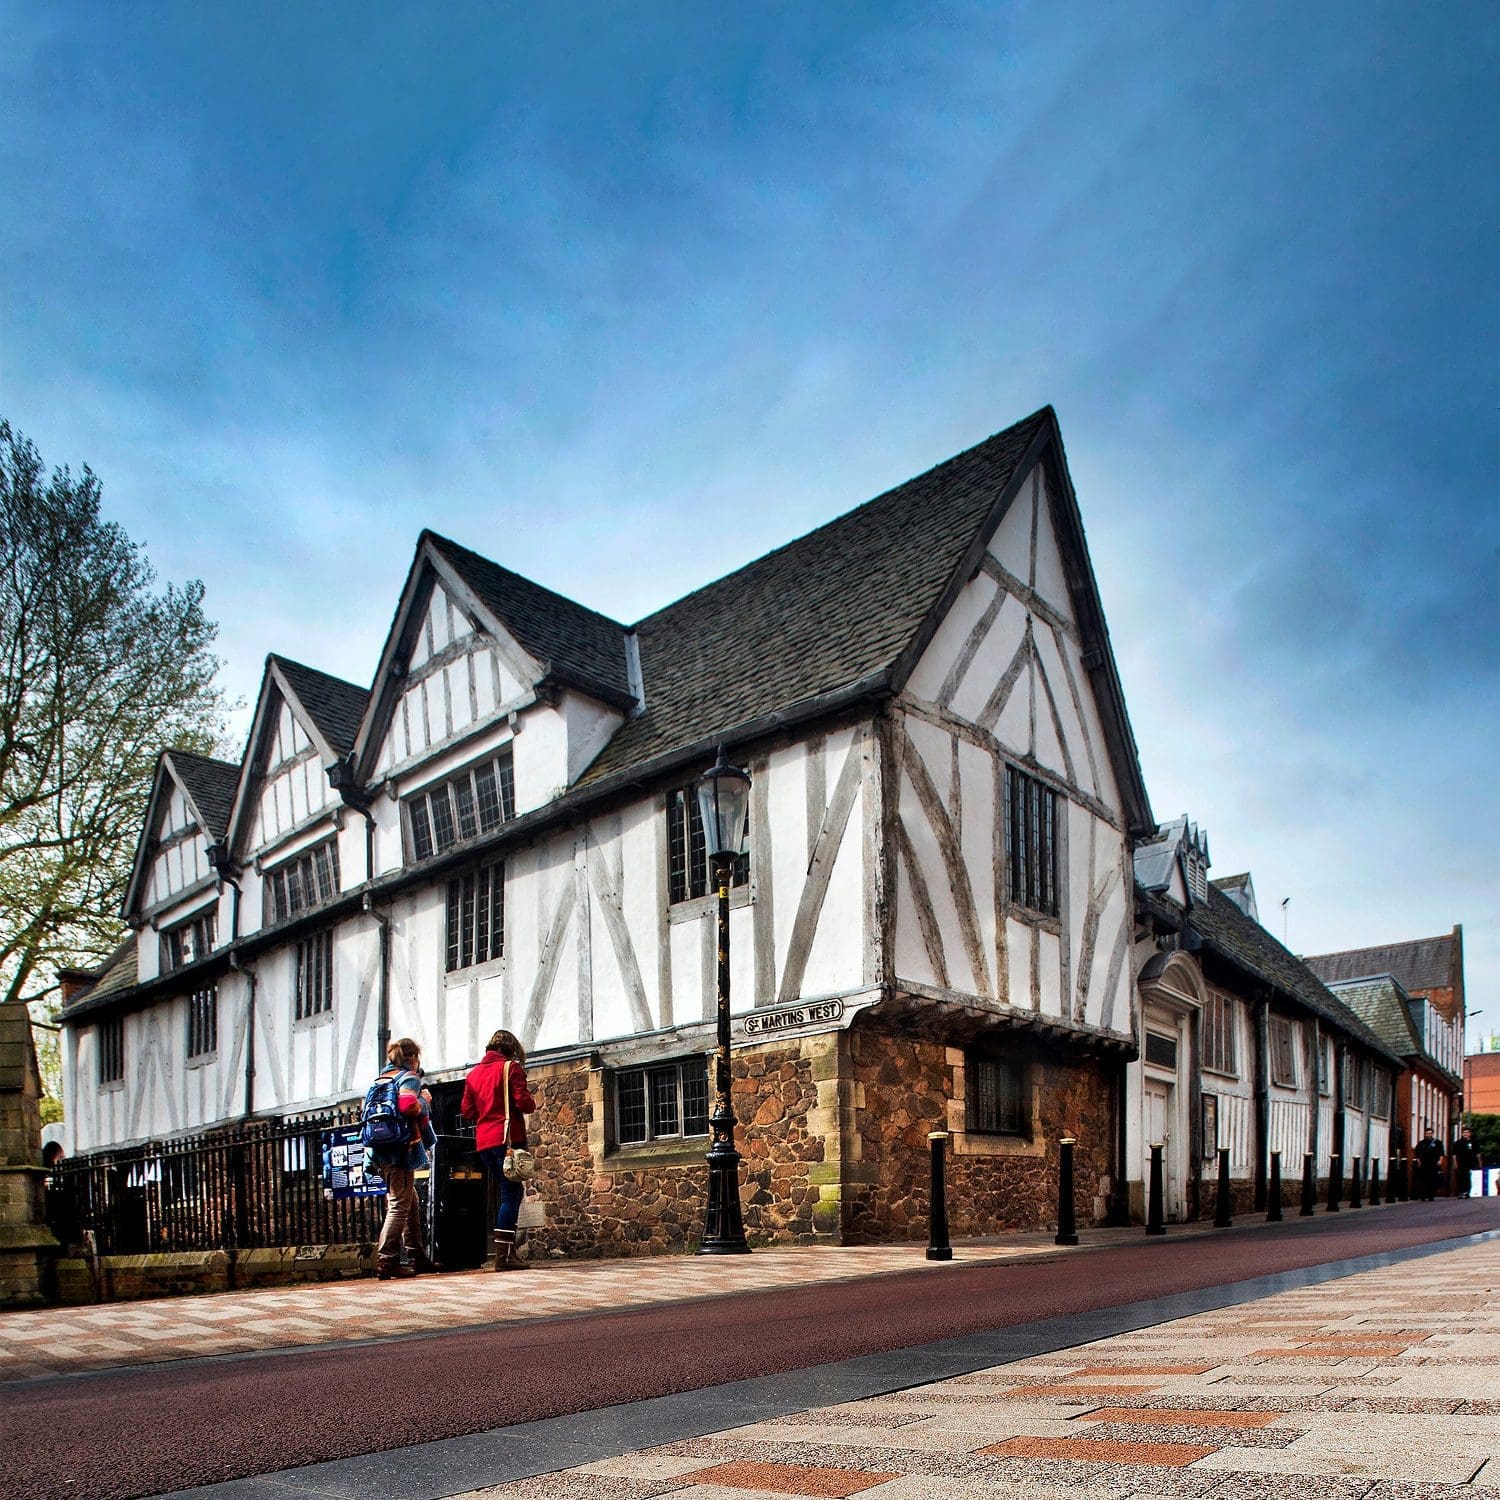 Leicester Guildhall,